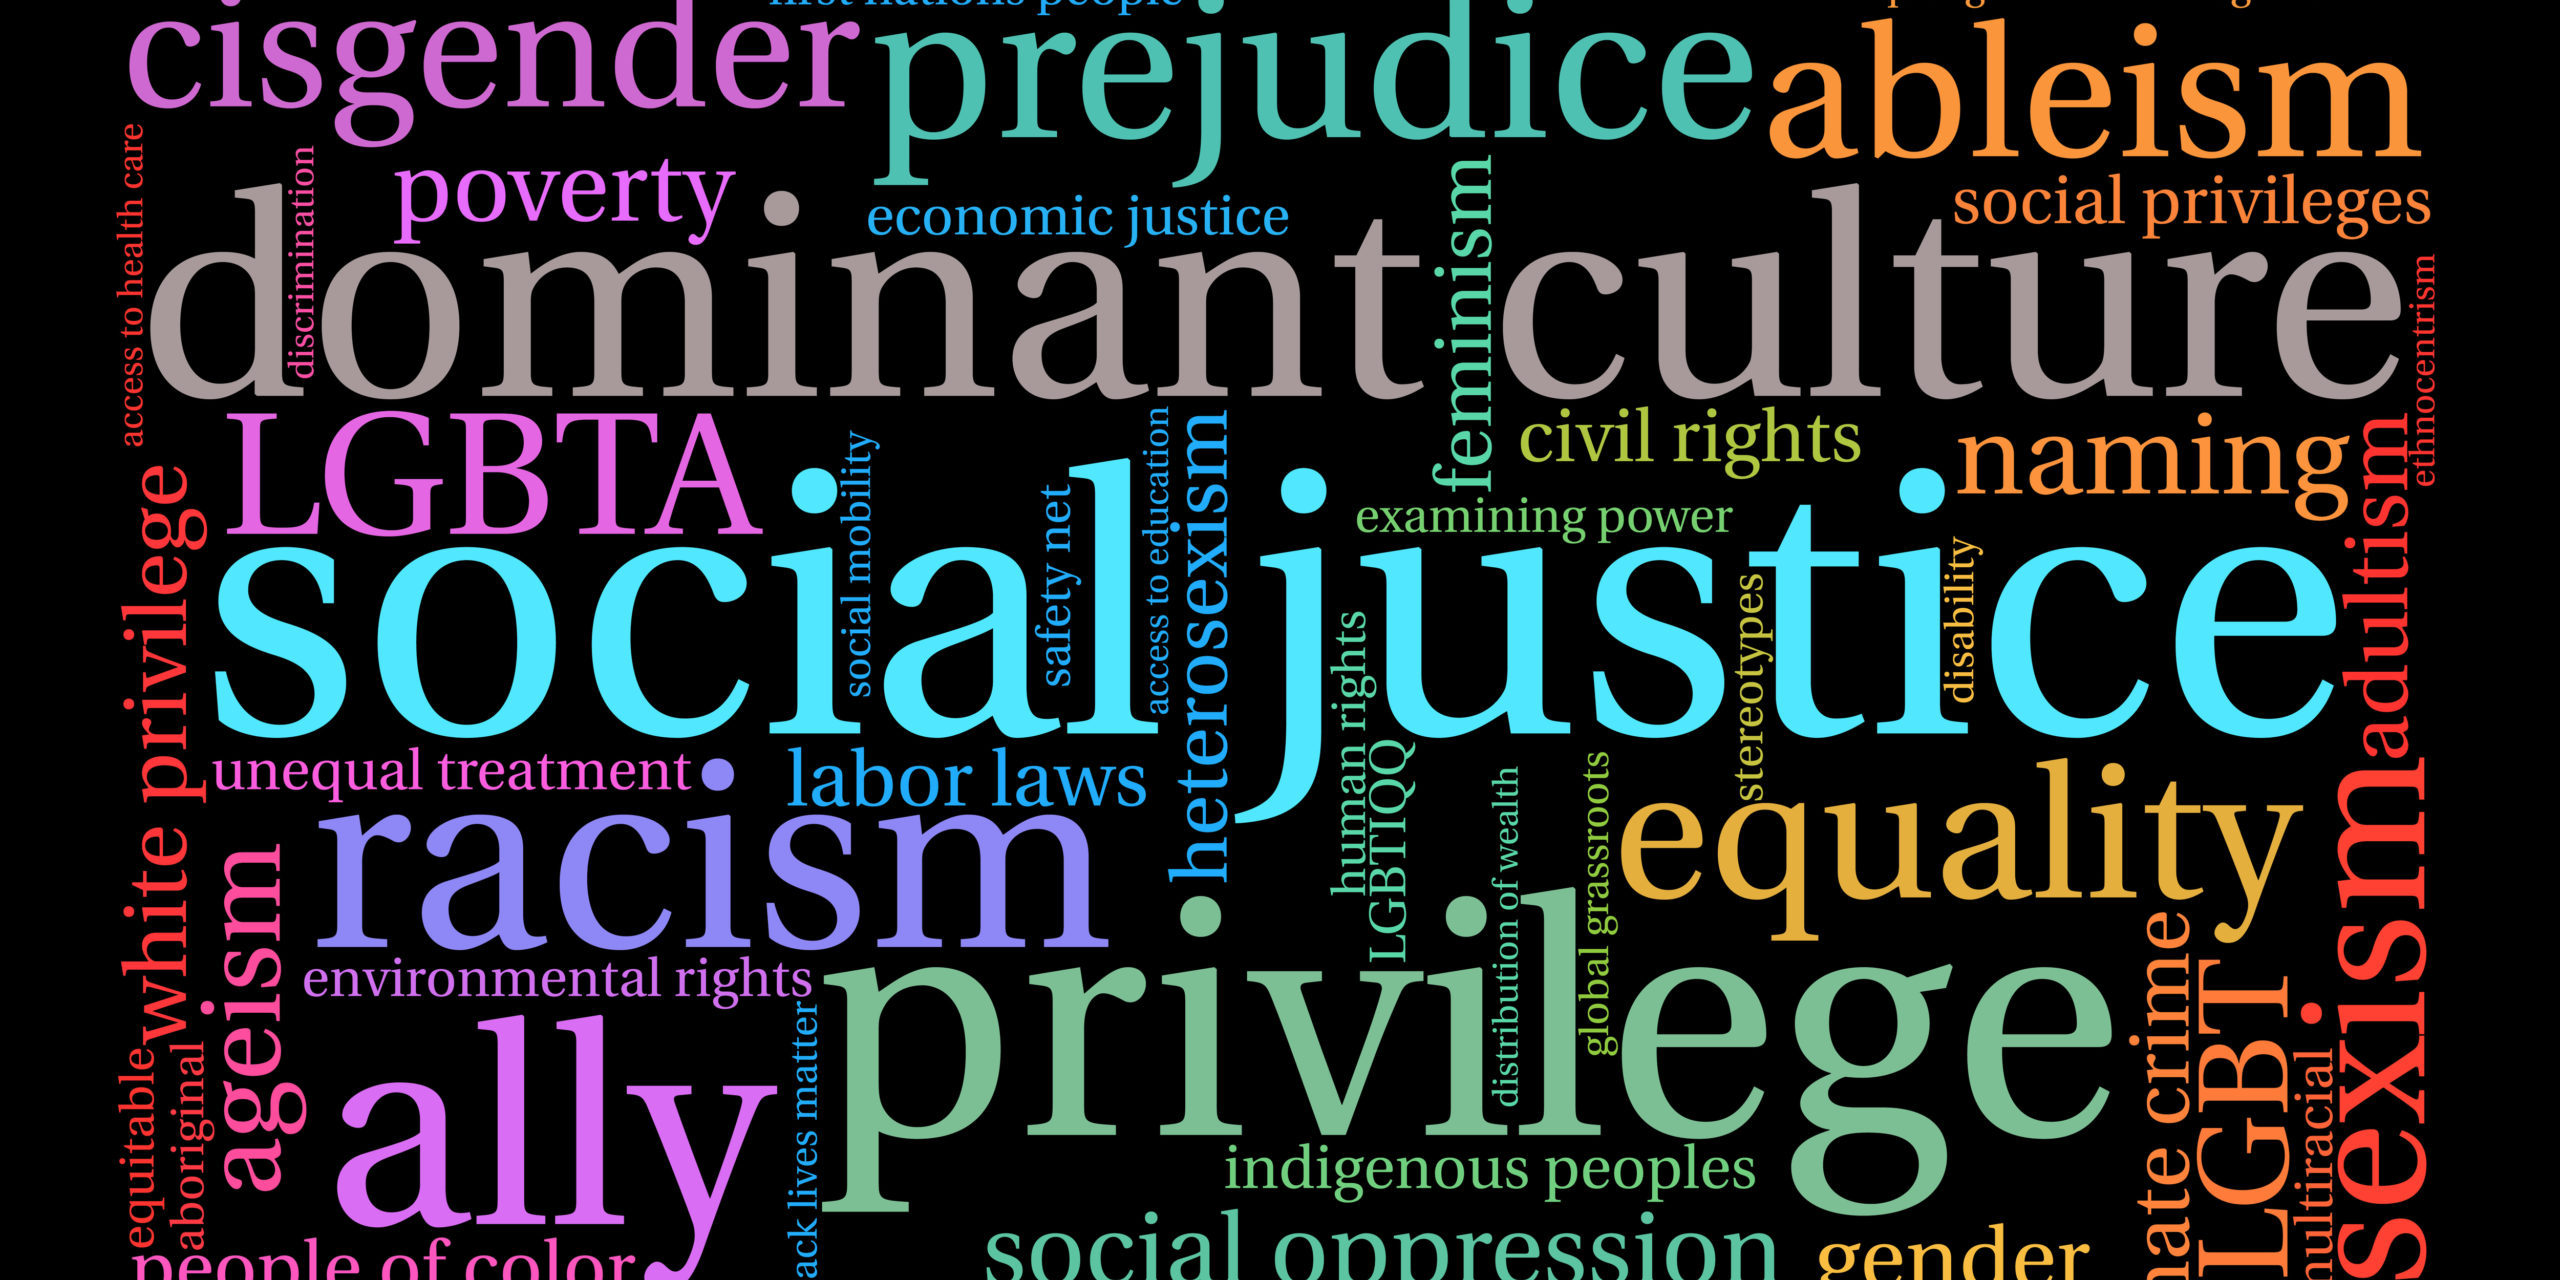 write a speech on social justice for all